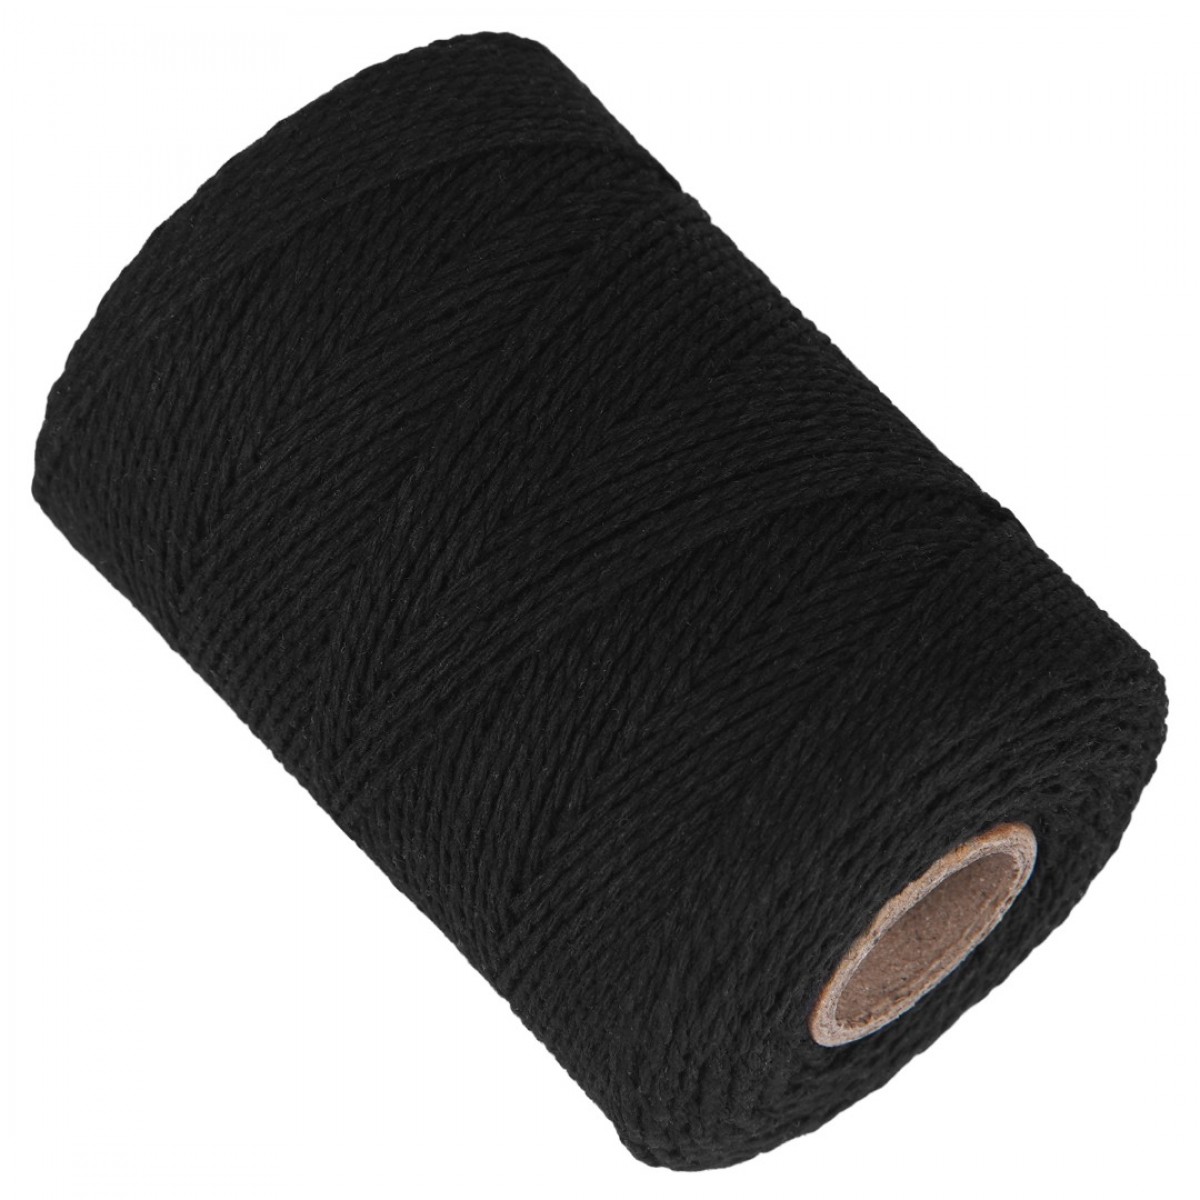 Natural Cotton Black Twine String - Ohtomber 656 Feet 2MM Butchers Twine, Twine for Gift Wrapping, G